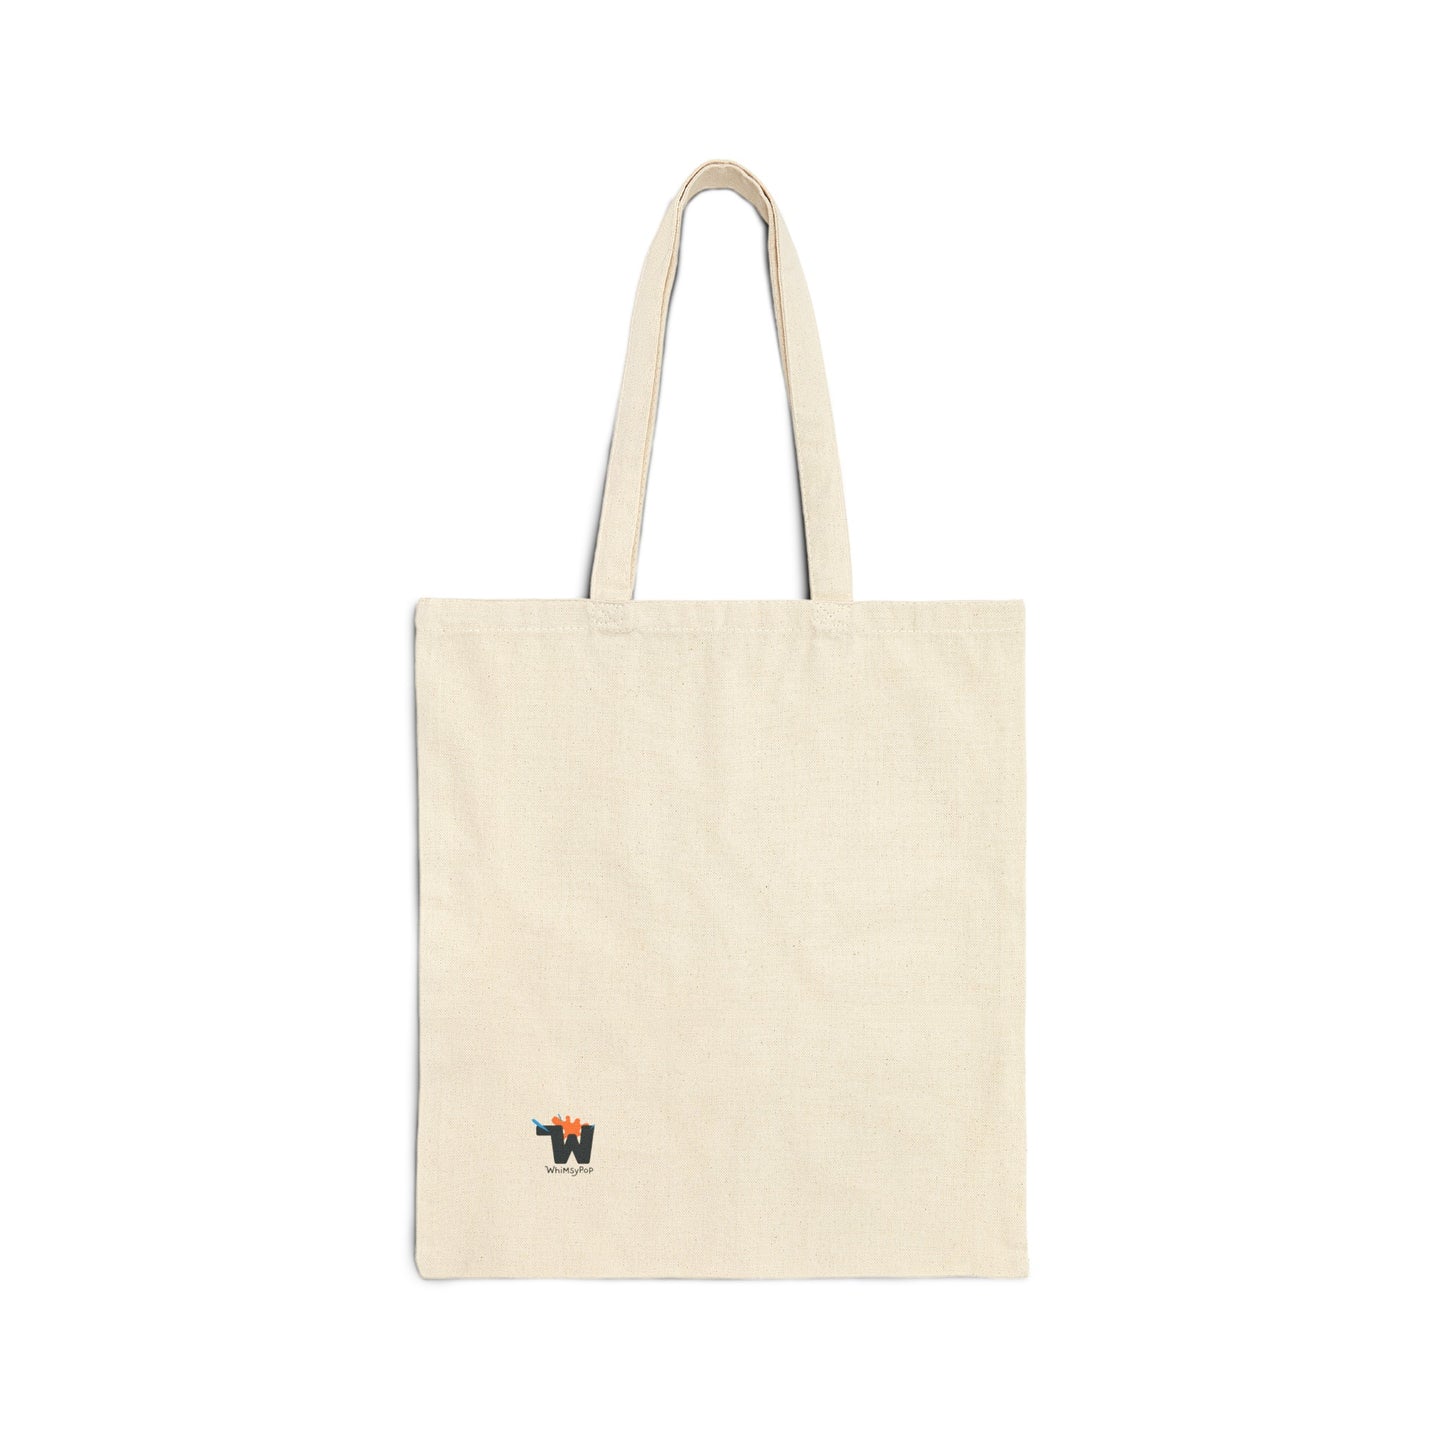 Cotton Canvas Tote Bag - Star Shaped Spill Collection - Stars Hum Tunes